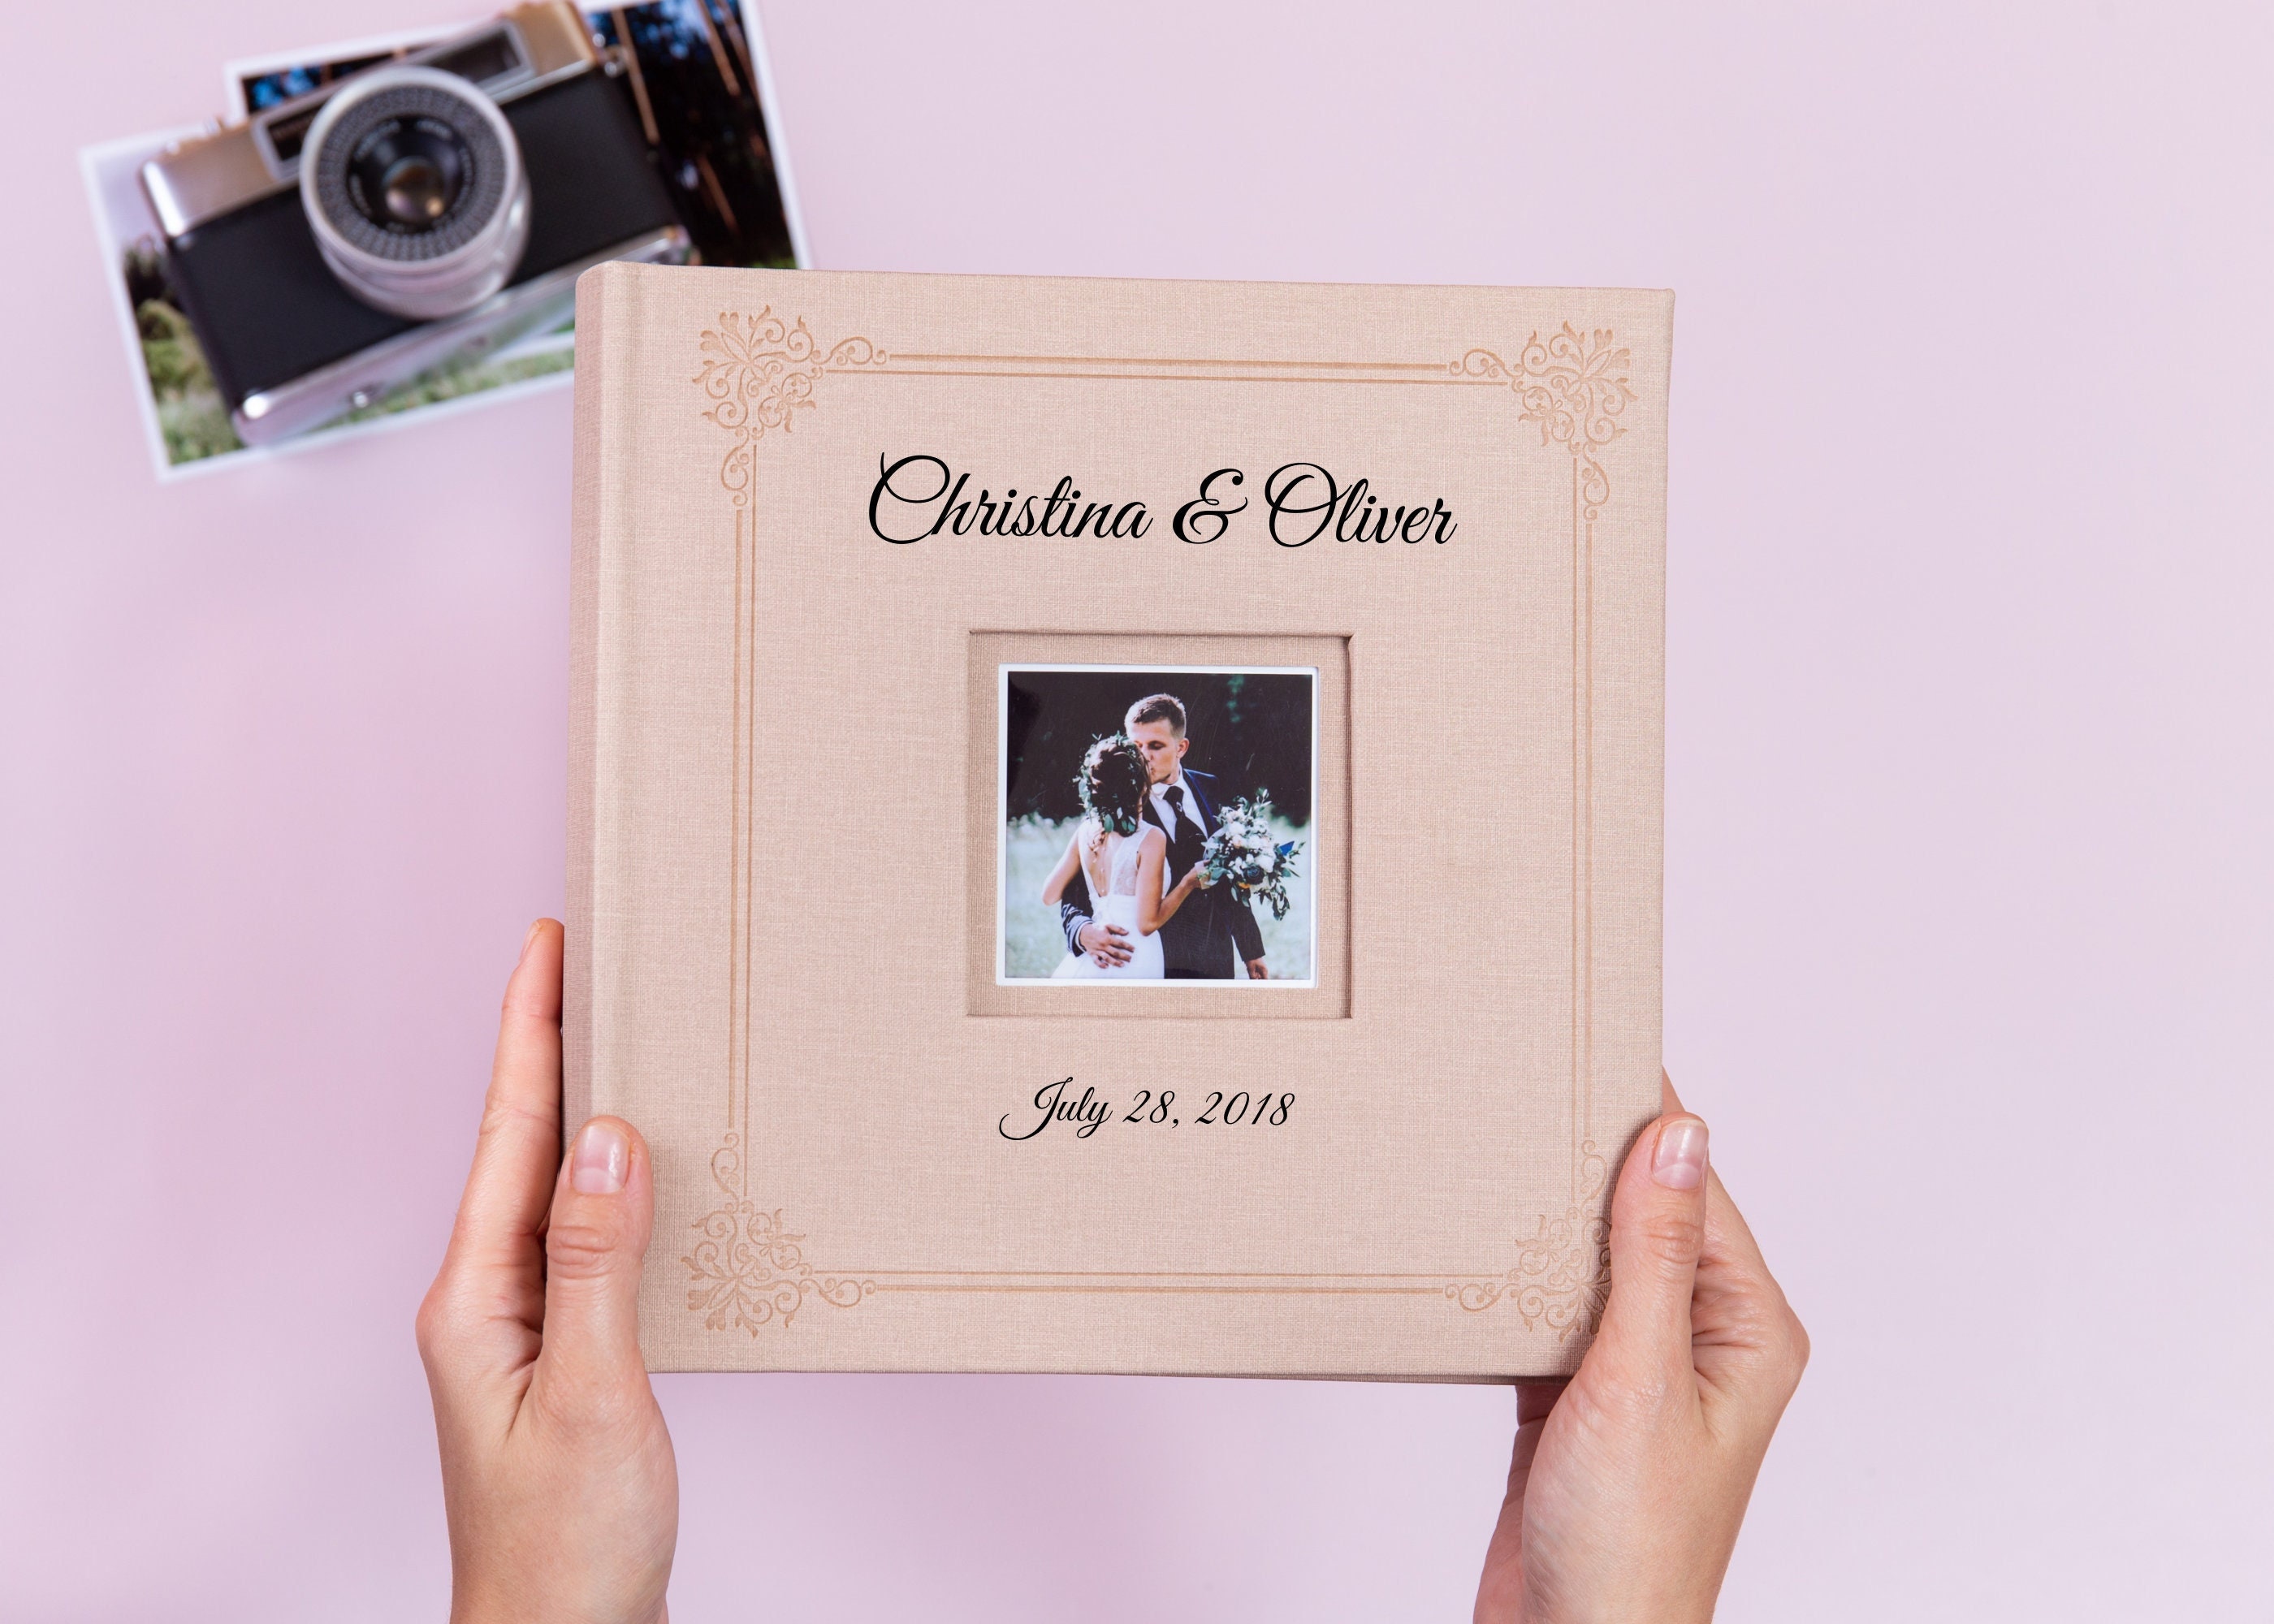 Personalized 4x6 Photo Album for 100 4x6 Photos. Album With Sleeves. Pocket  Photo Album for 10x15 Cm Photos. Personalized Christmas Gift 